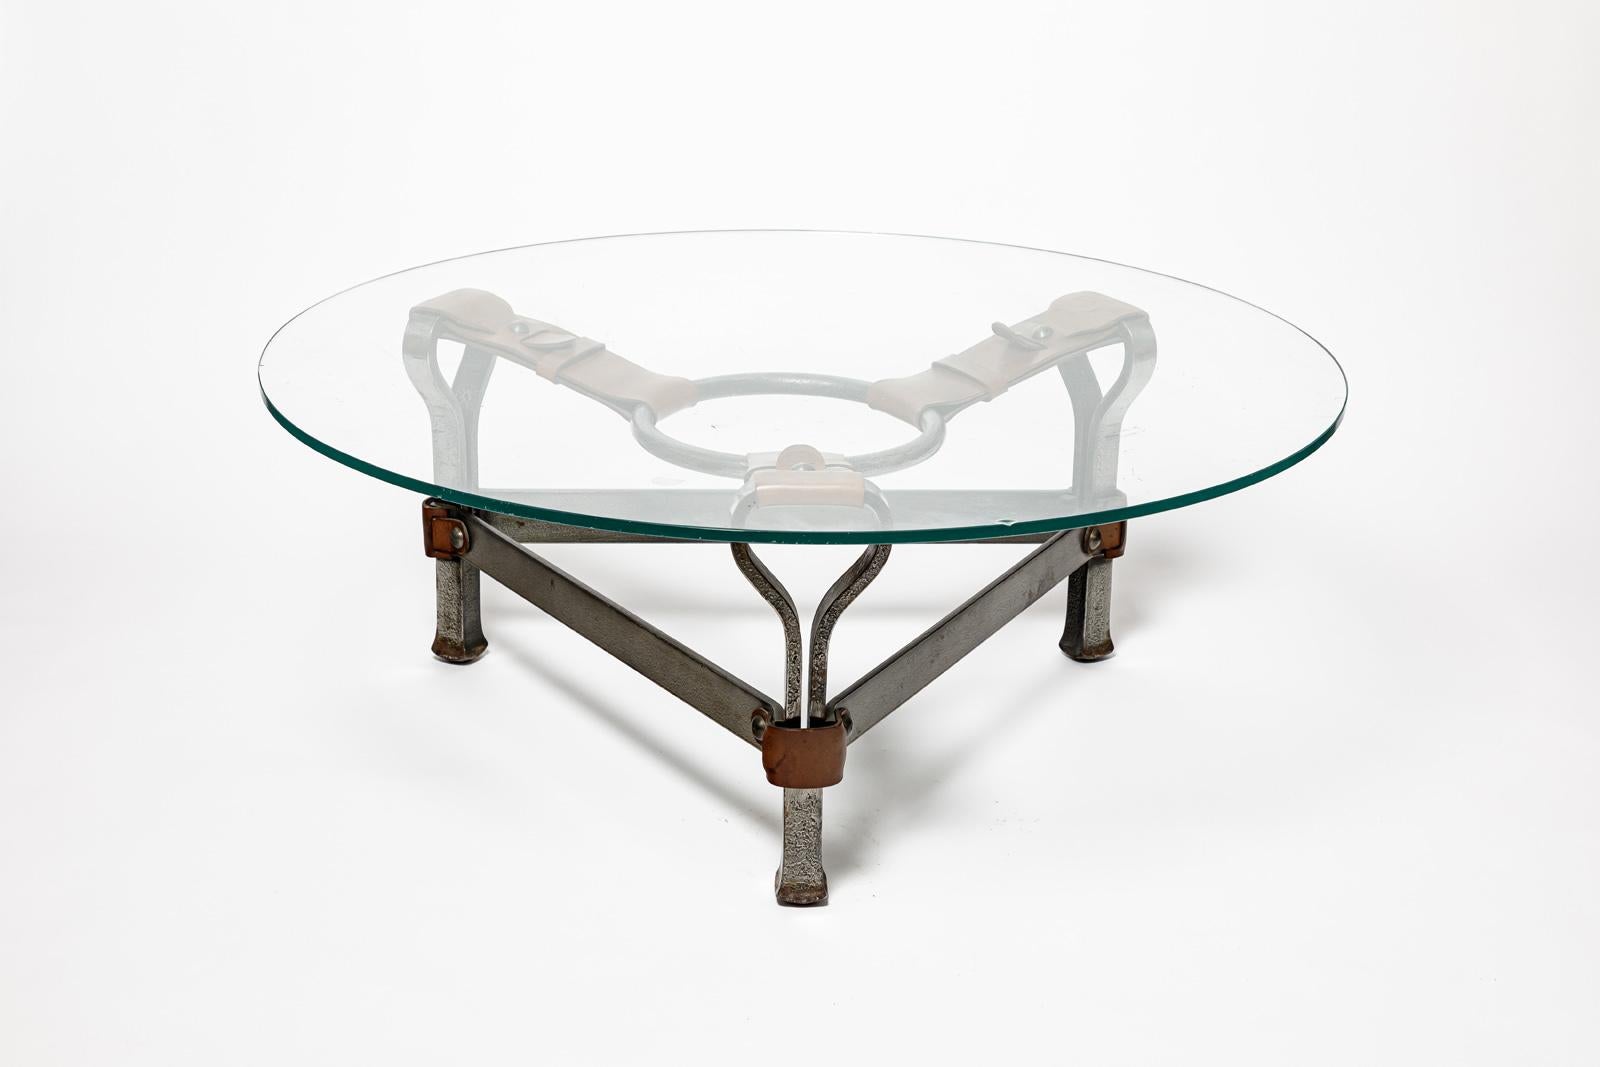 20th Century Metal and leather mid-century low sofa table by Jean Pierre Ryckaert 1960 design For Sale